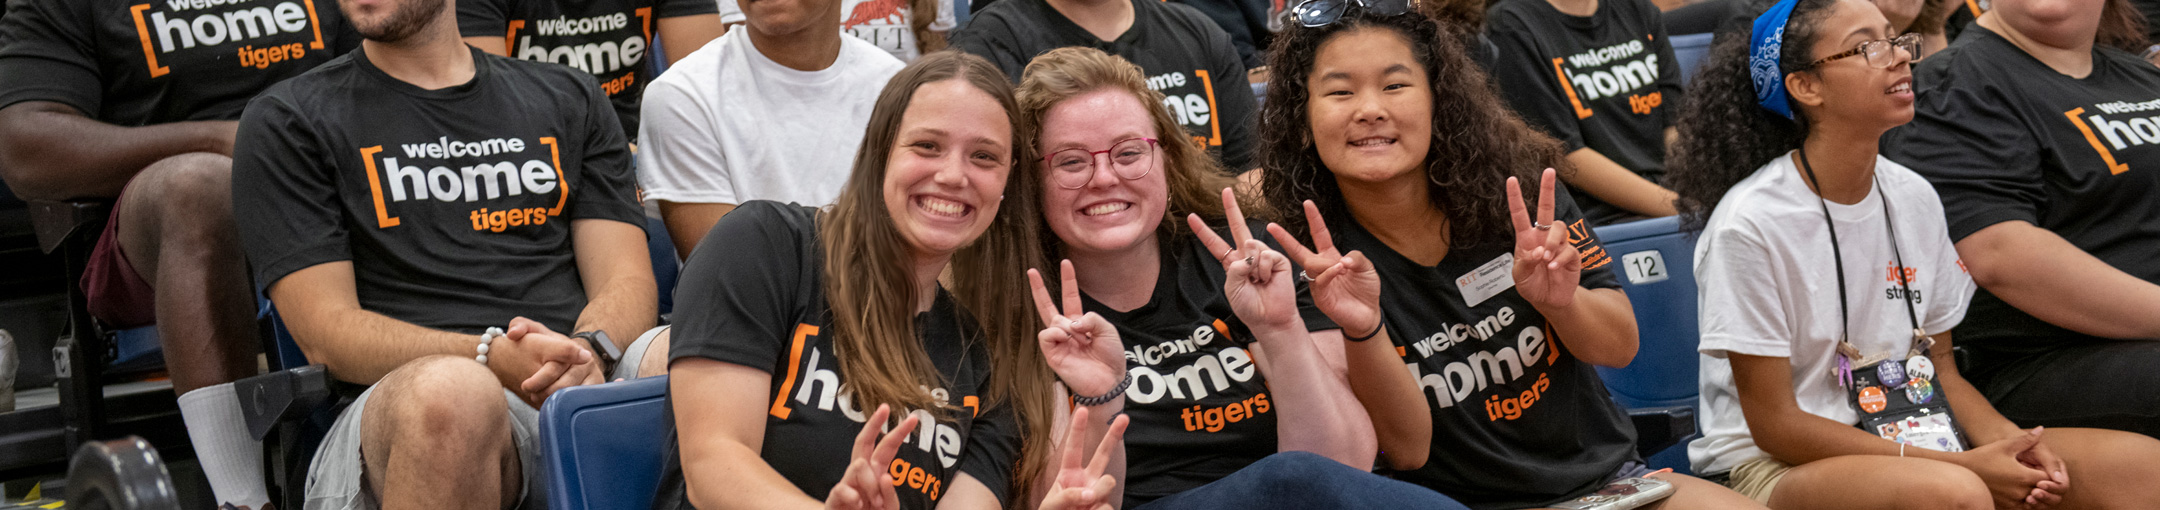 First-Year students at orientation wearing "Welcome home, tigers" shirts